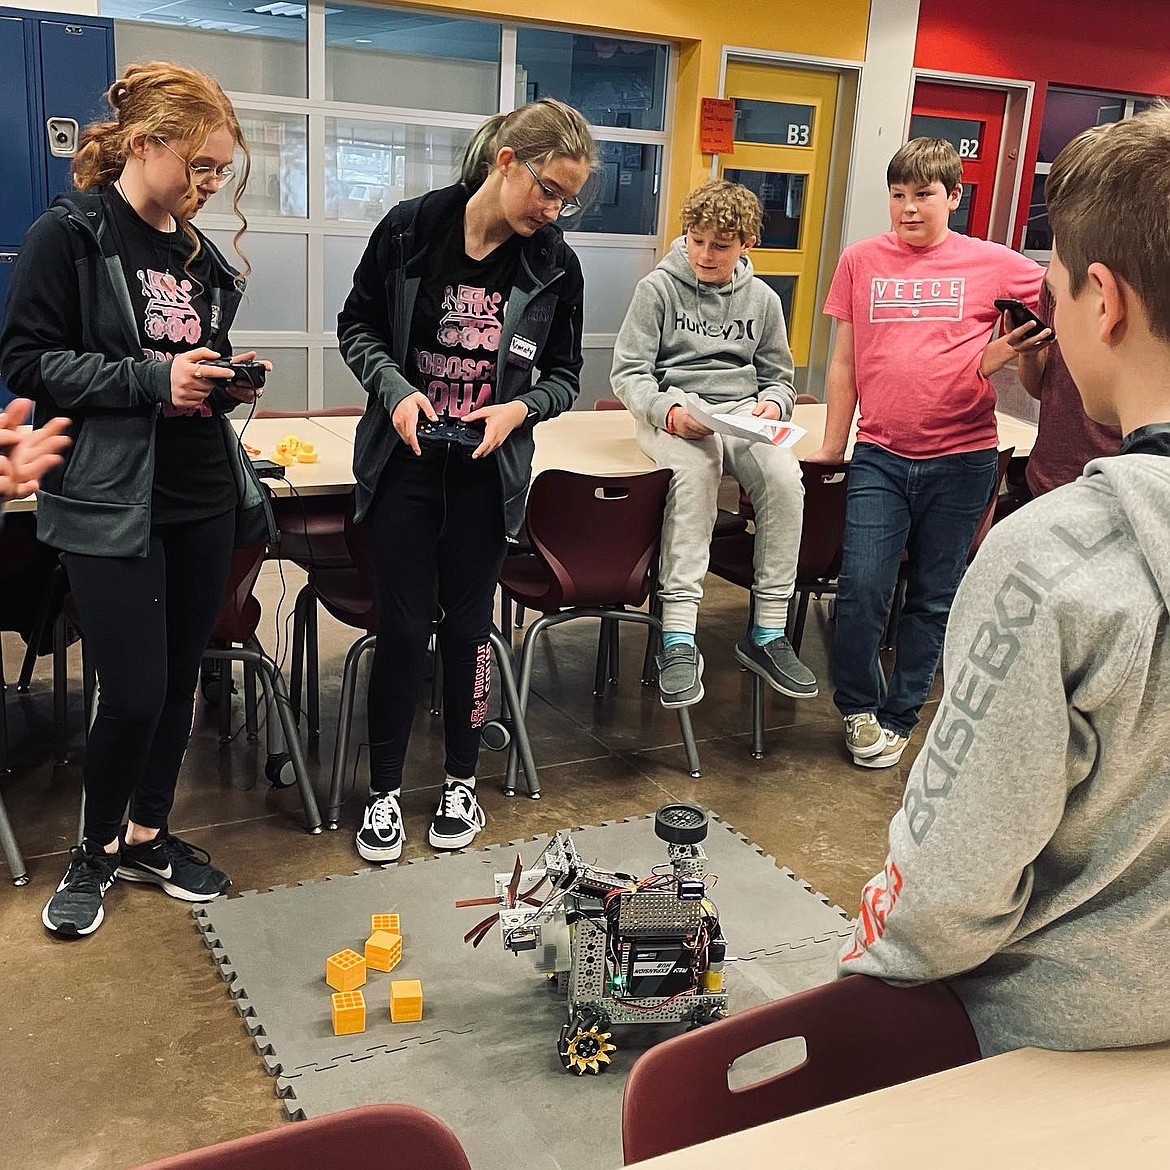 (L to R) RoboScout Squad members, Zia Walker and Kennedy Dortch, both sophomores at Flathead High School, lead a robotics demonstration at West Valley School as seventh-graders Brock Moloney and Thomas Airhart watch. The demonstration and scrimmage came ahead of state competitions set for Feb. 26 and March 6. (Photo provided)